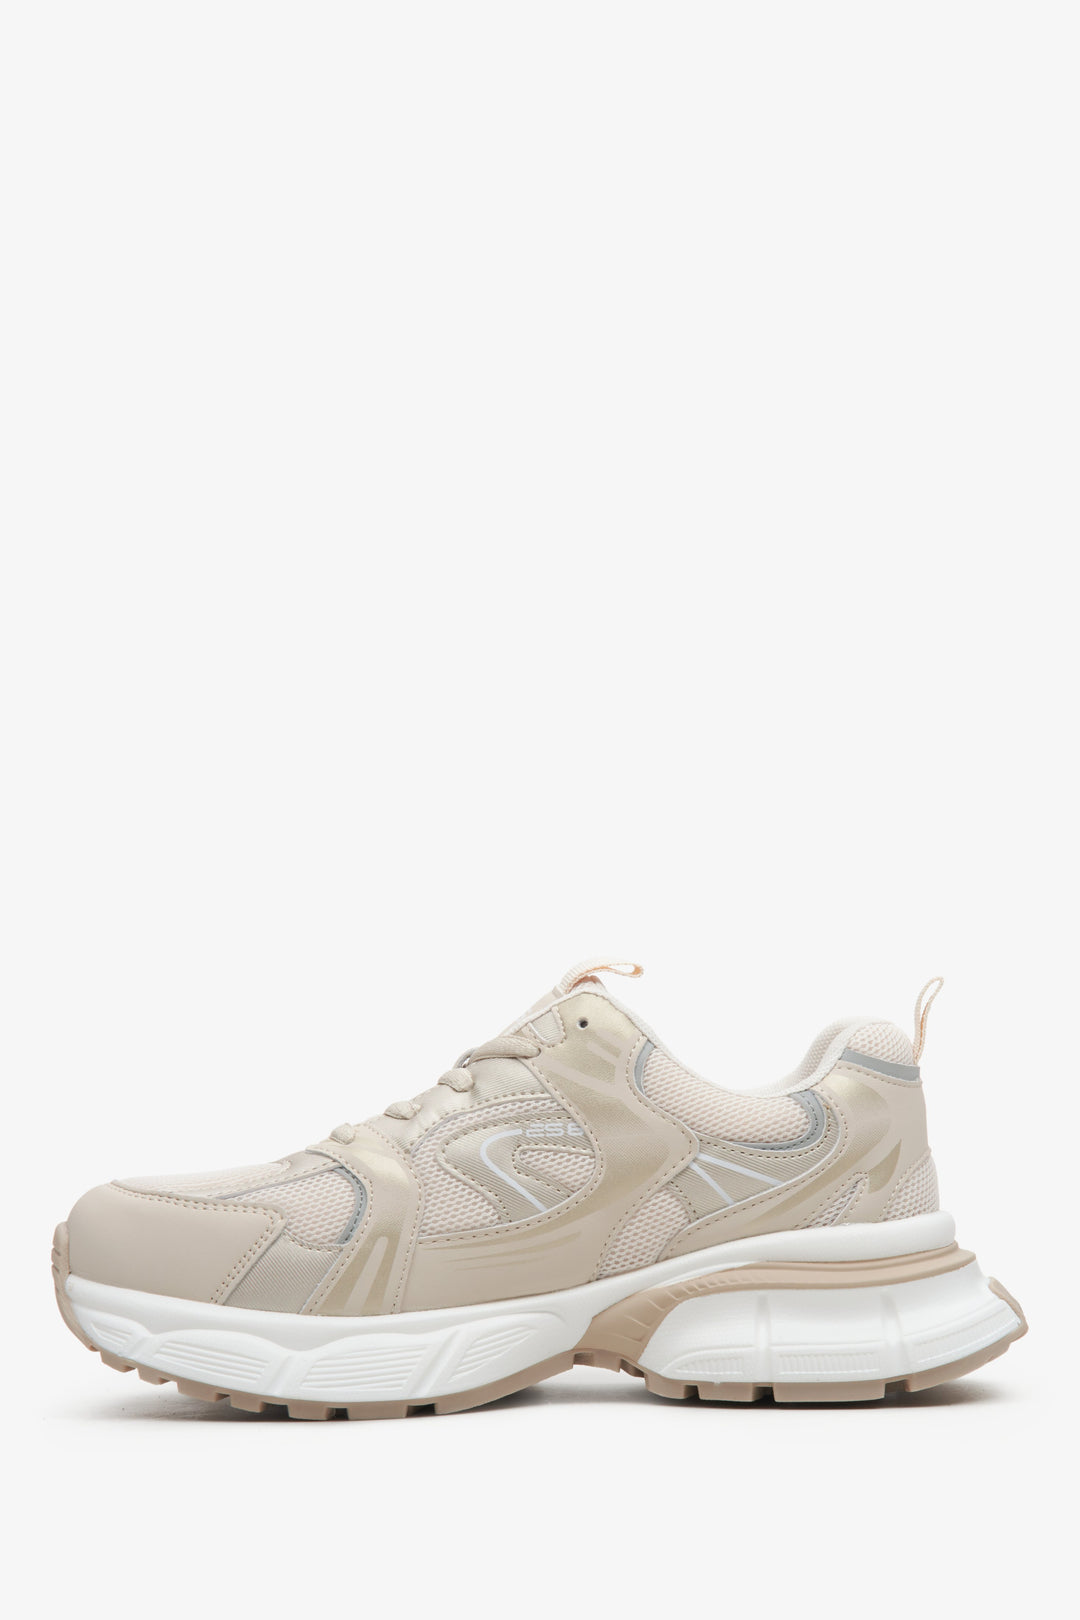 Women's beige and white athletic sneakers ES 8 - shoe profile.